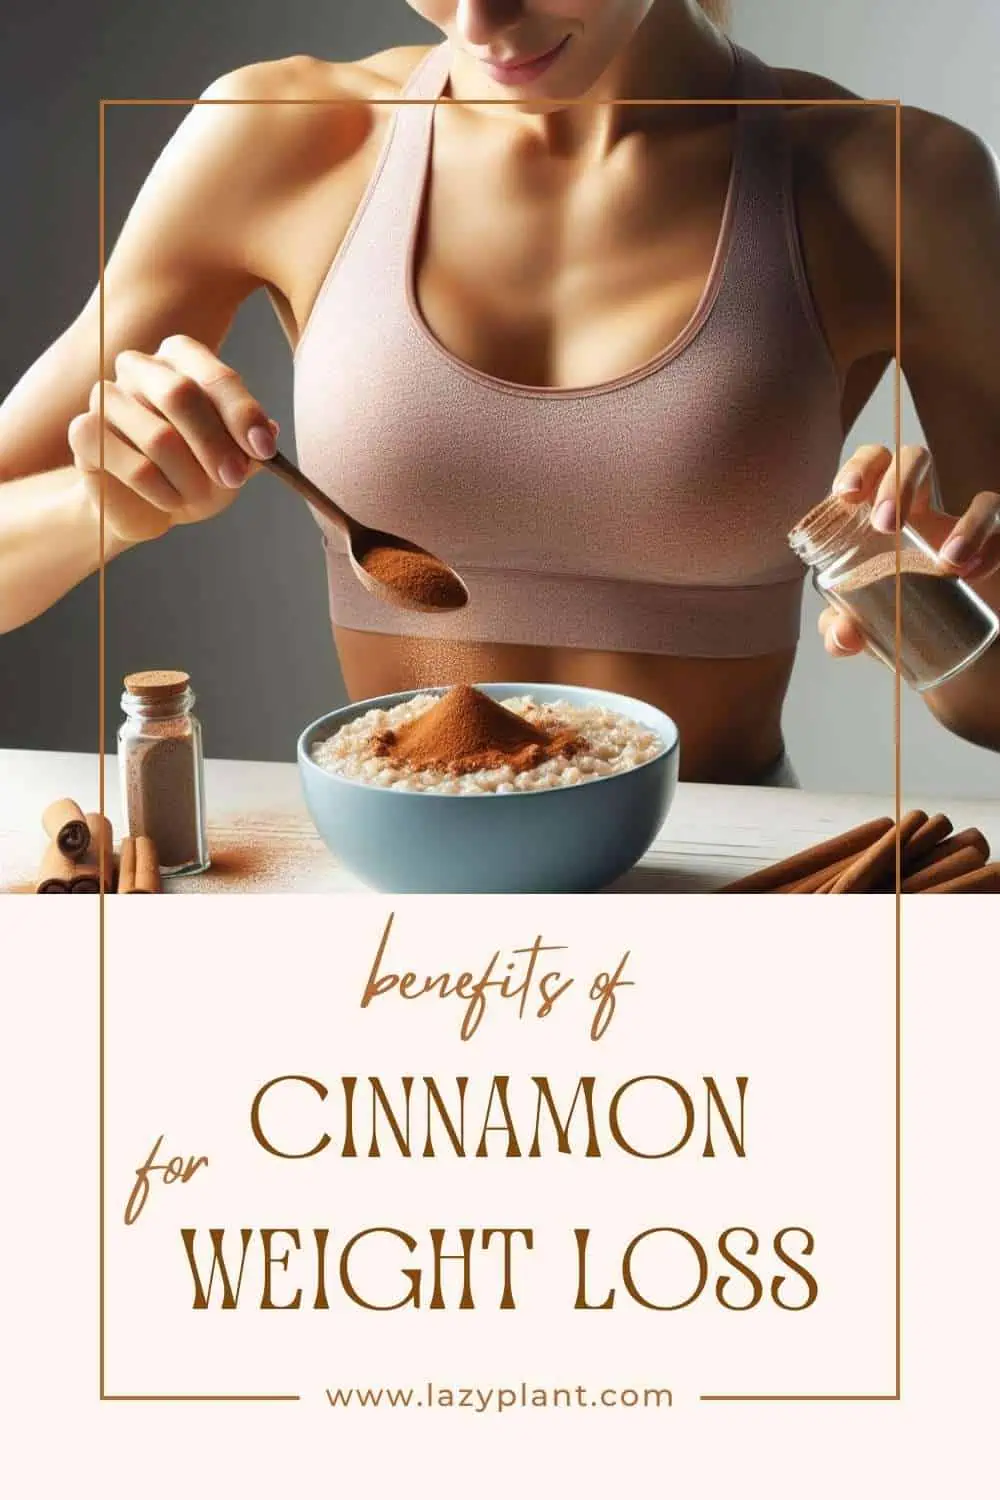 Which type of cinnamon is best for weight loss? Cinnamon recipe ideas for a lean body.